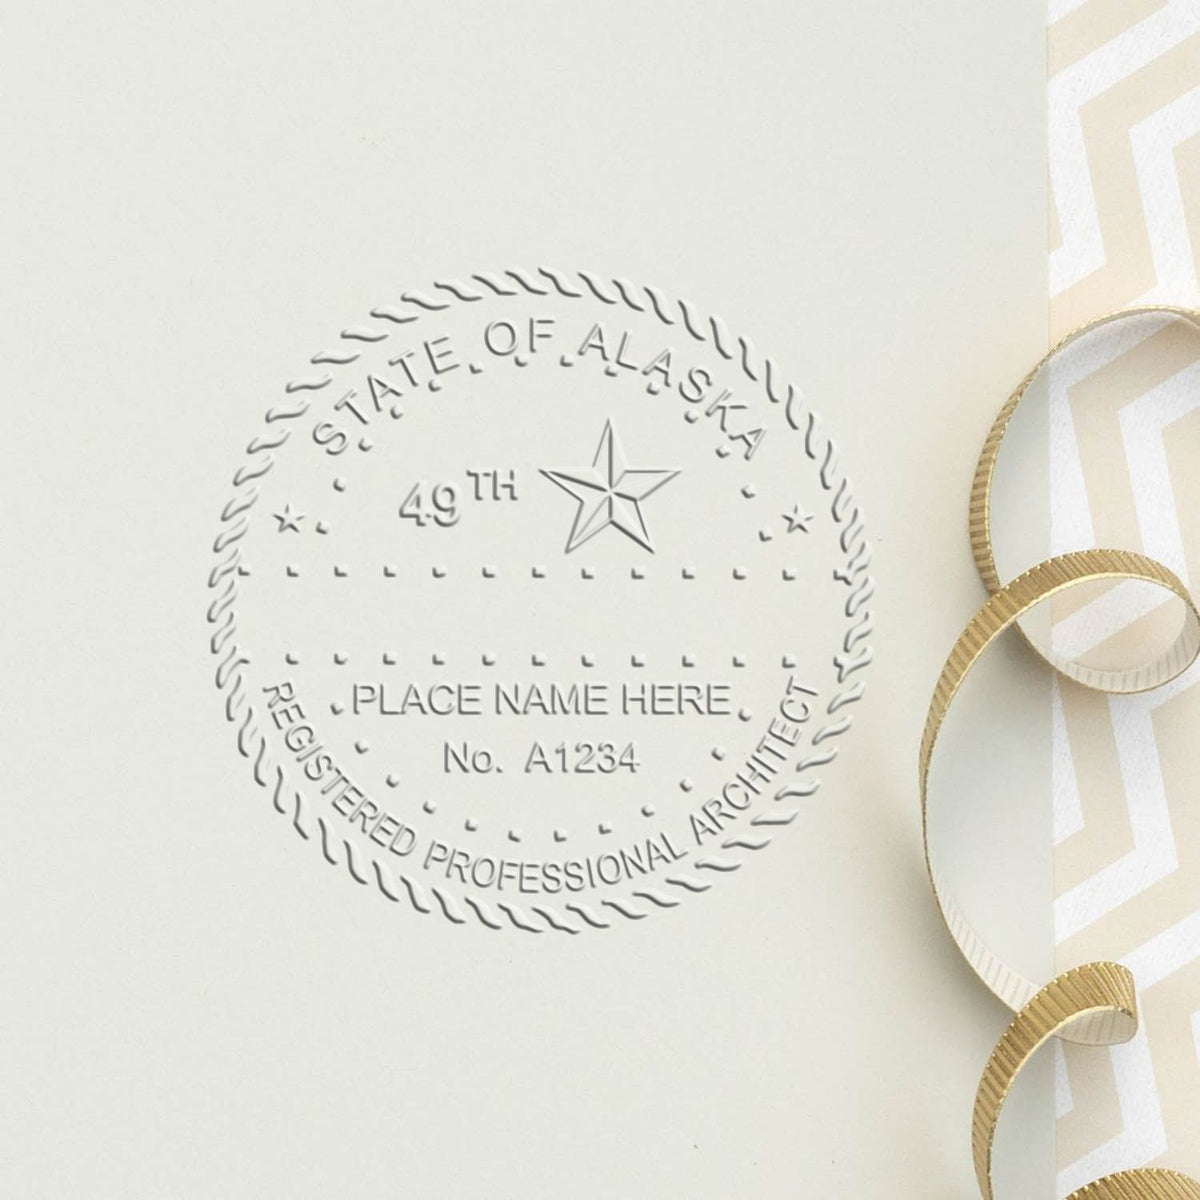 A stamped impression of the Alaska Desk Architect Embossing Seal in this stylish lifestyle photo, setting the tone for a unique and personalized product.